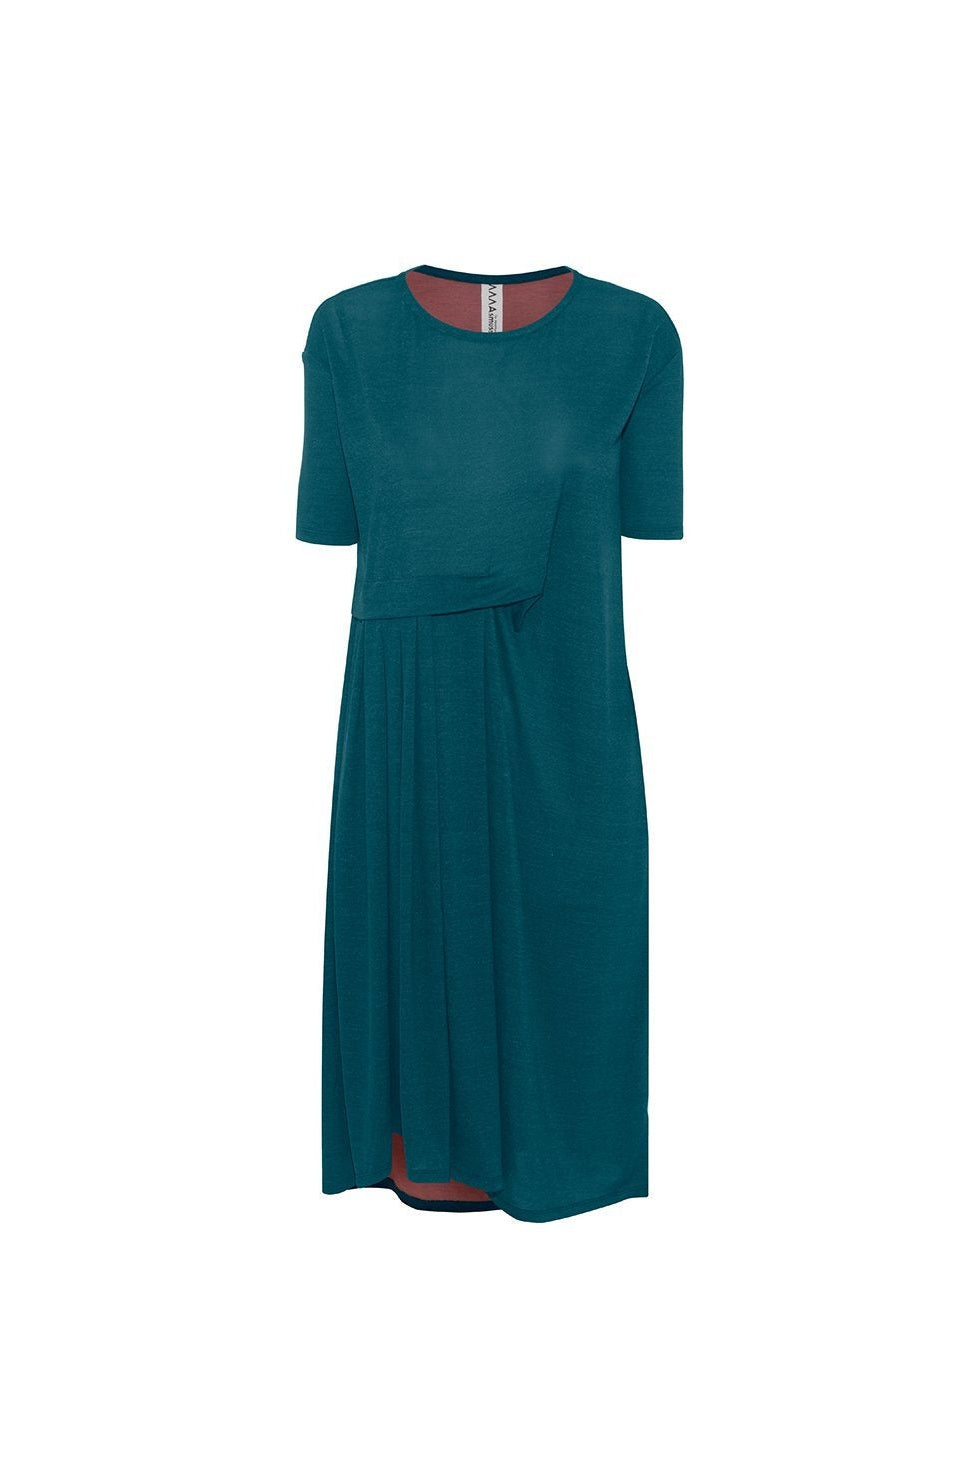 The Asmuss Asymmetric Pleat Dress in Pine Green.  Wear it in the office, outdoors or where ever you travel to